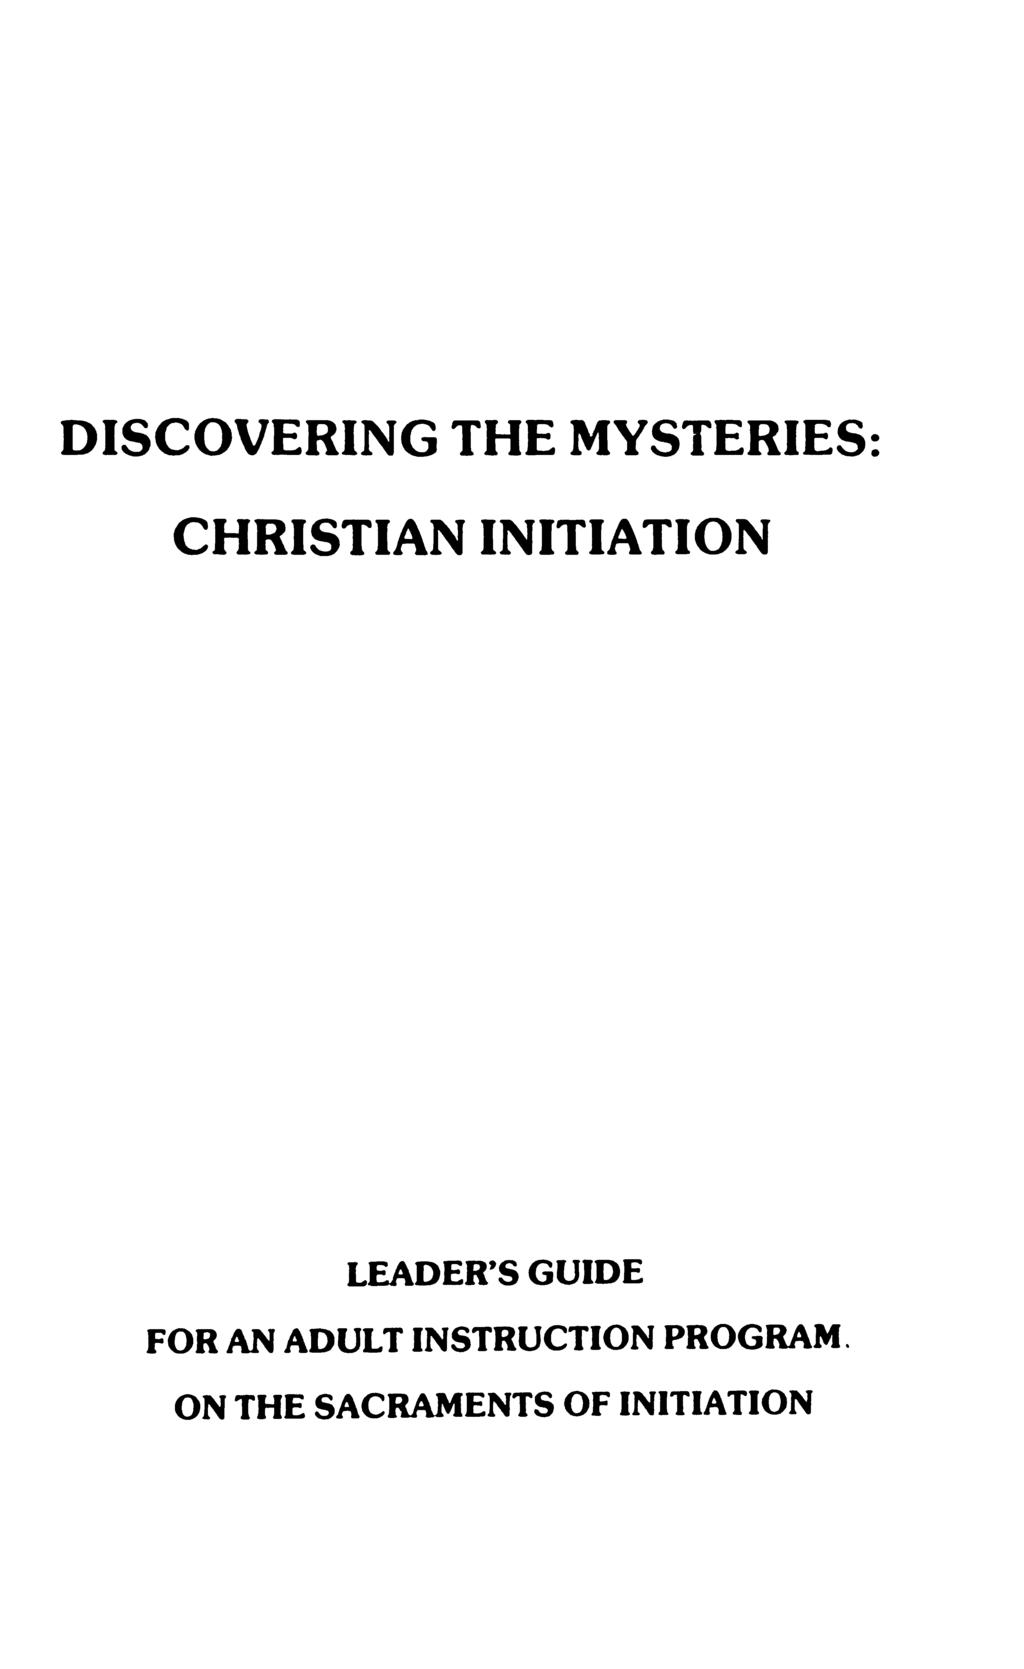 DISCOVERING THE MYSTERIES CHRISTIAN INITIATION LEADER'S GUIDE